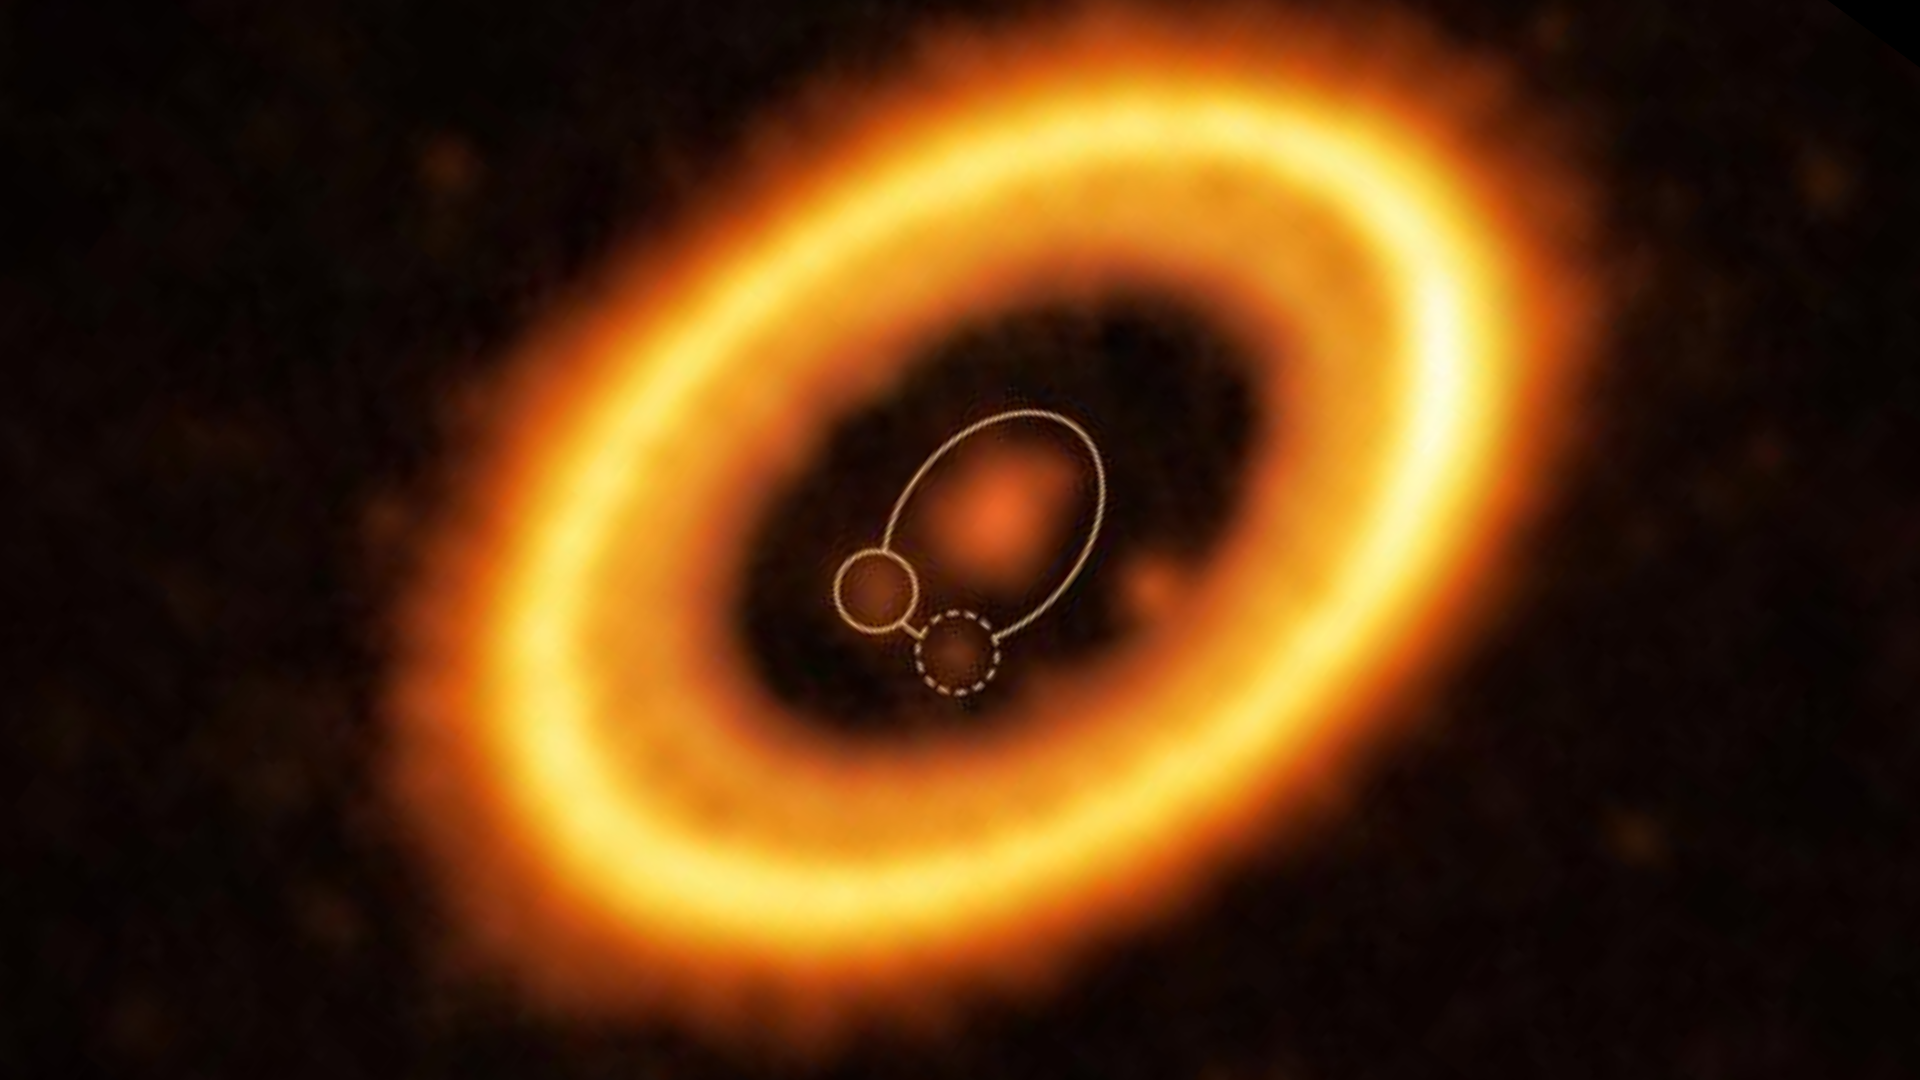 blurry orange, concentric rings surround a central star in deep space.